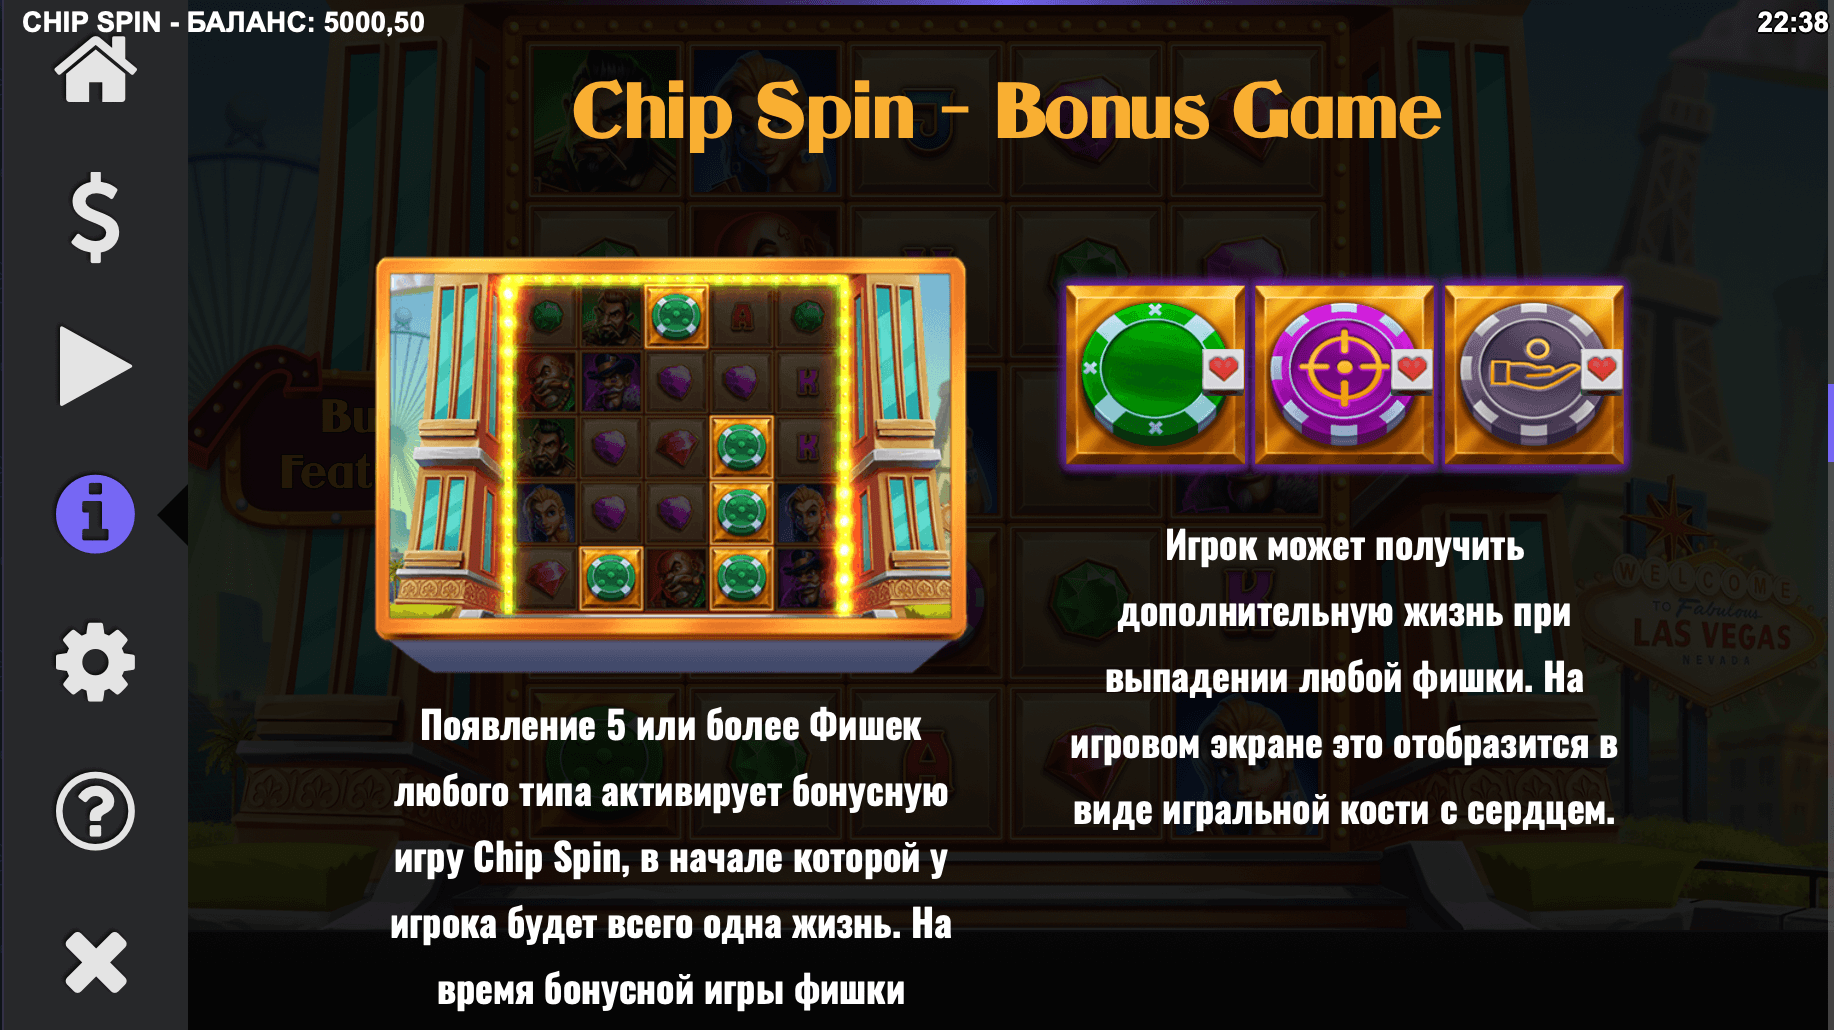 Chip Spin Game process